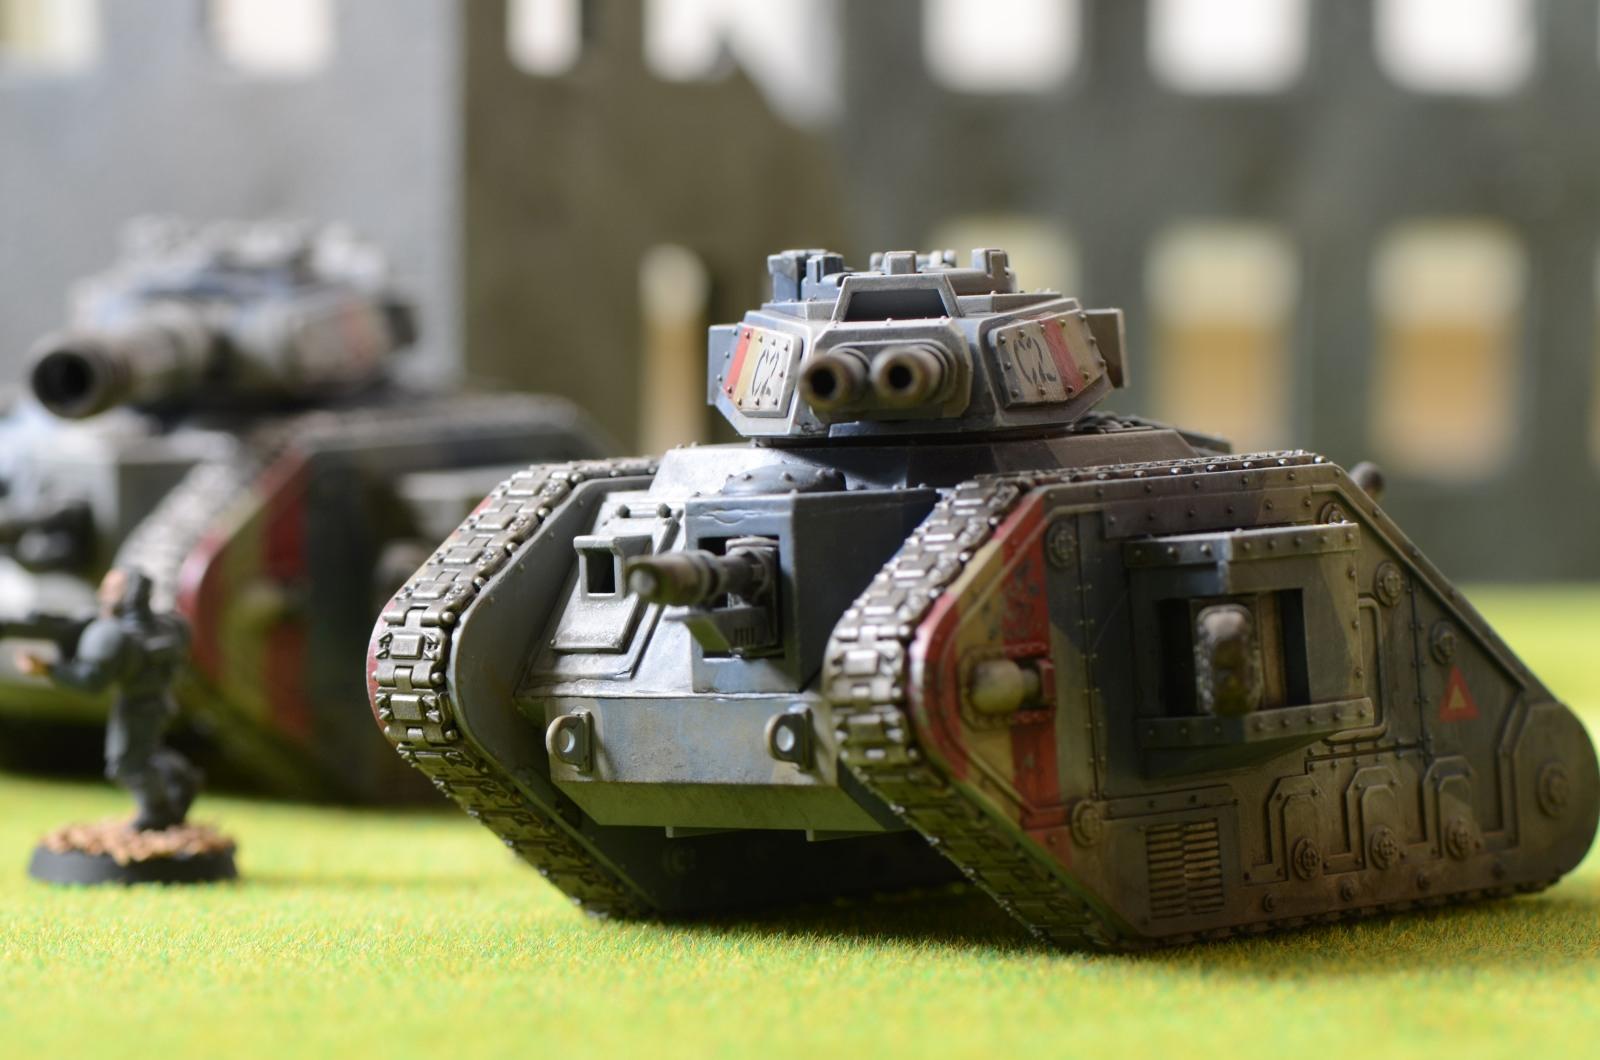 C, Camouflage, Imperial Guard, Infantry, Leman, Leman Russ, Russ, Squadron, Stormtrooper, Tank, Warhammer 40,000, Zoat